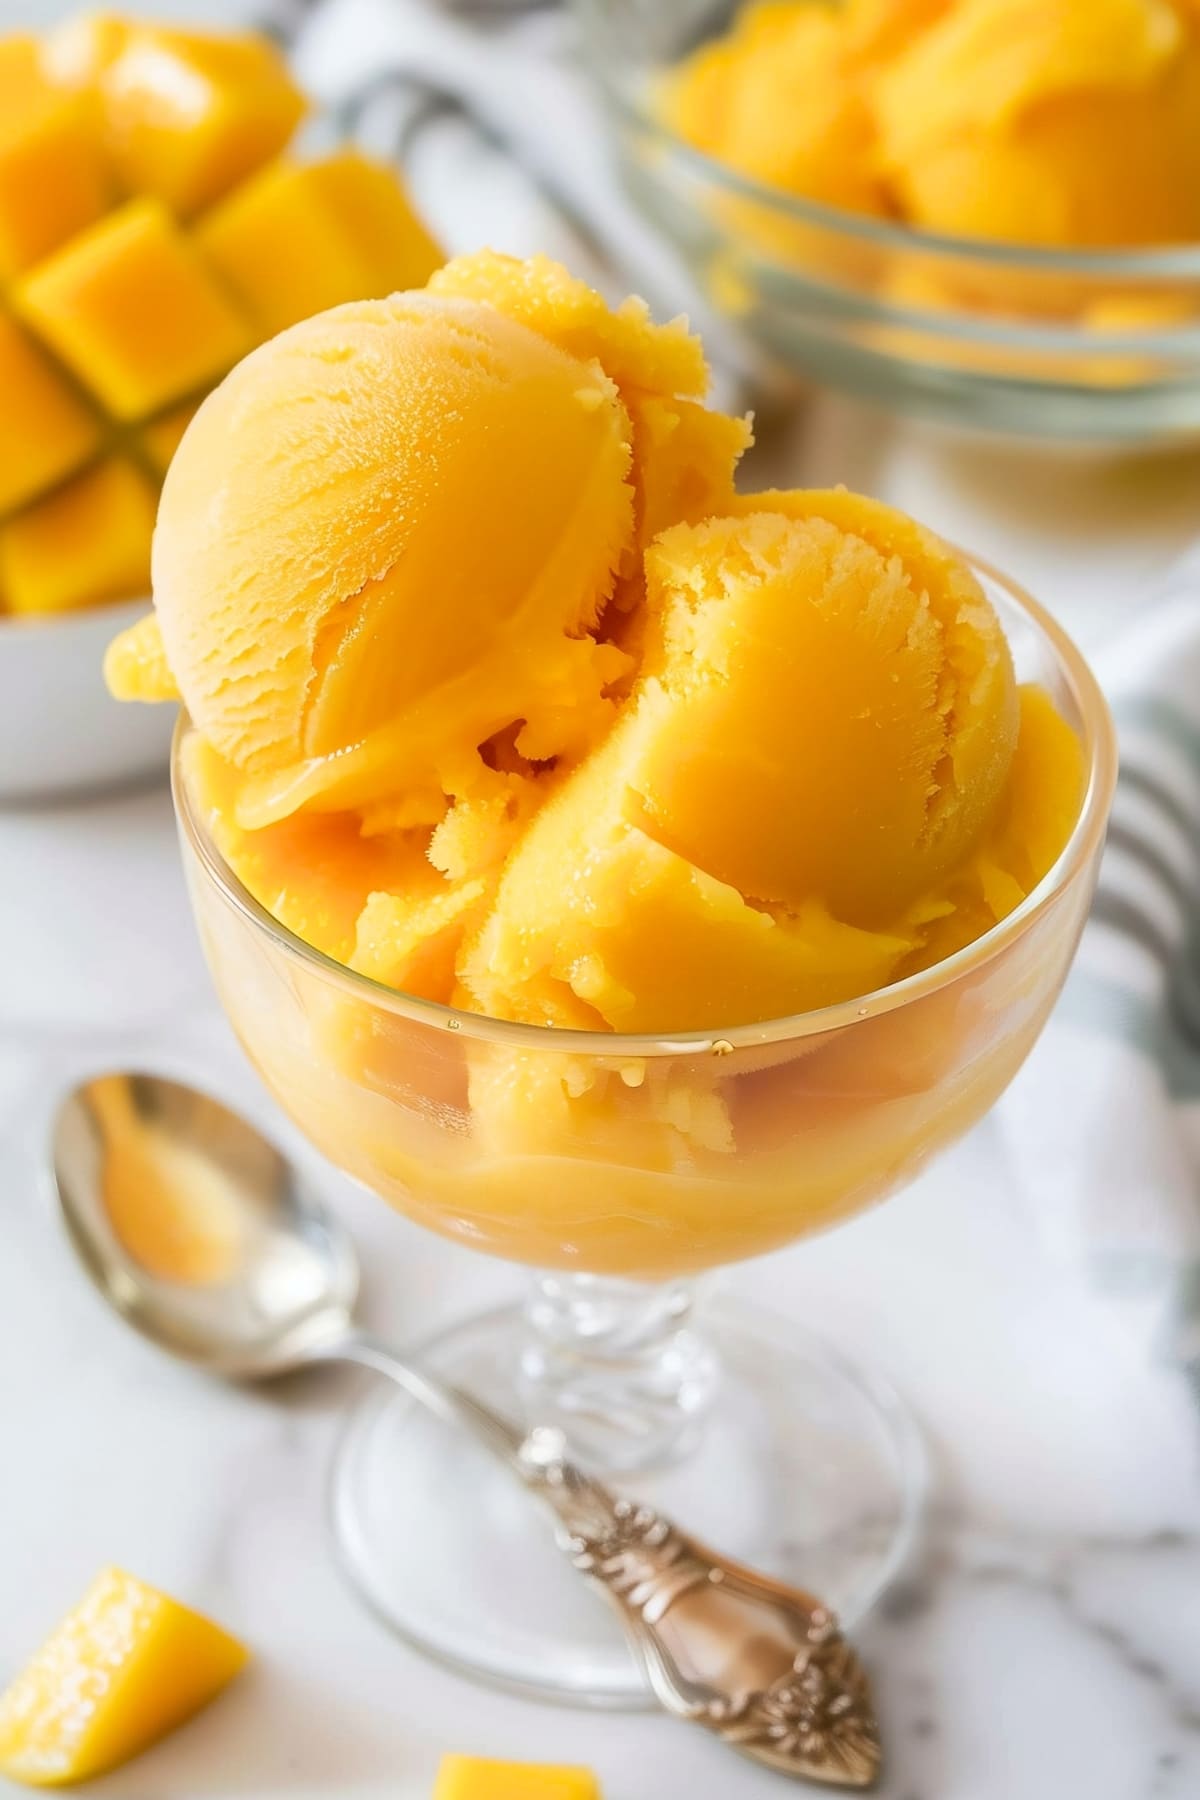 An appetizing mango sorbet recipe made with ripe mangoes and a touch of lemon juice. Ideal for a cool dessert.